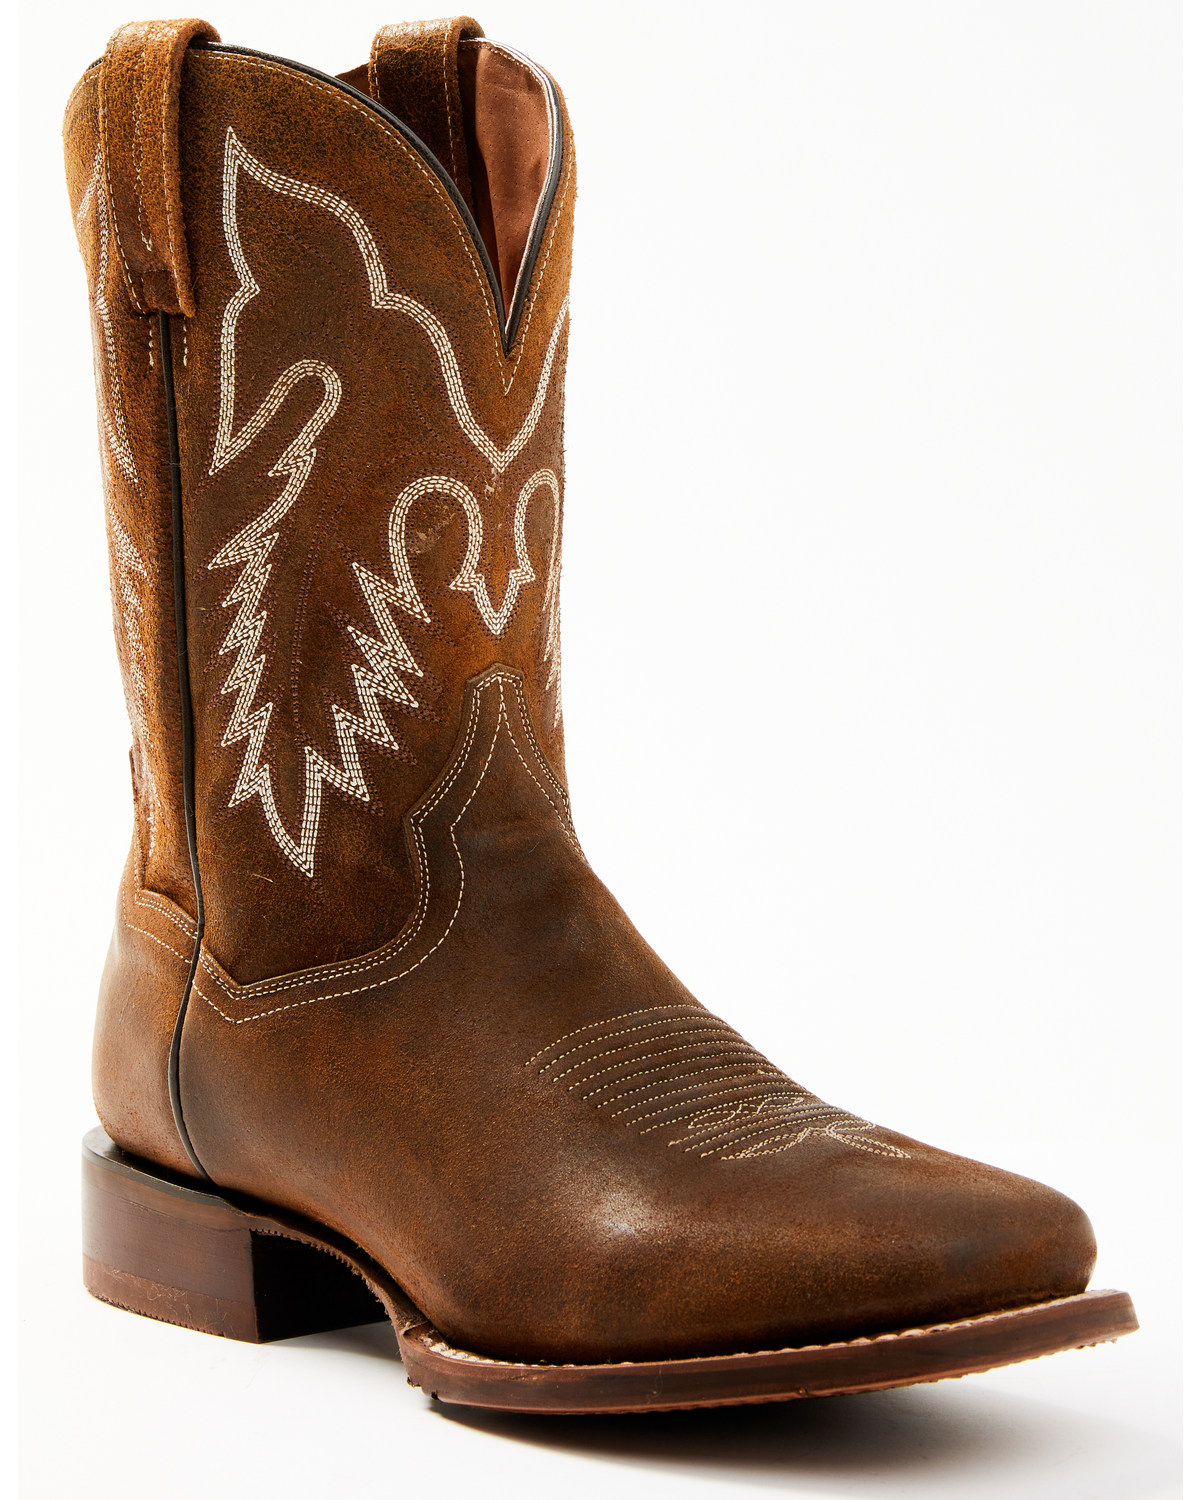 Dan Post Men's Stitched Western Performance Boots - Broad Square Toe